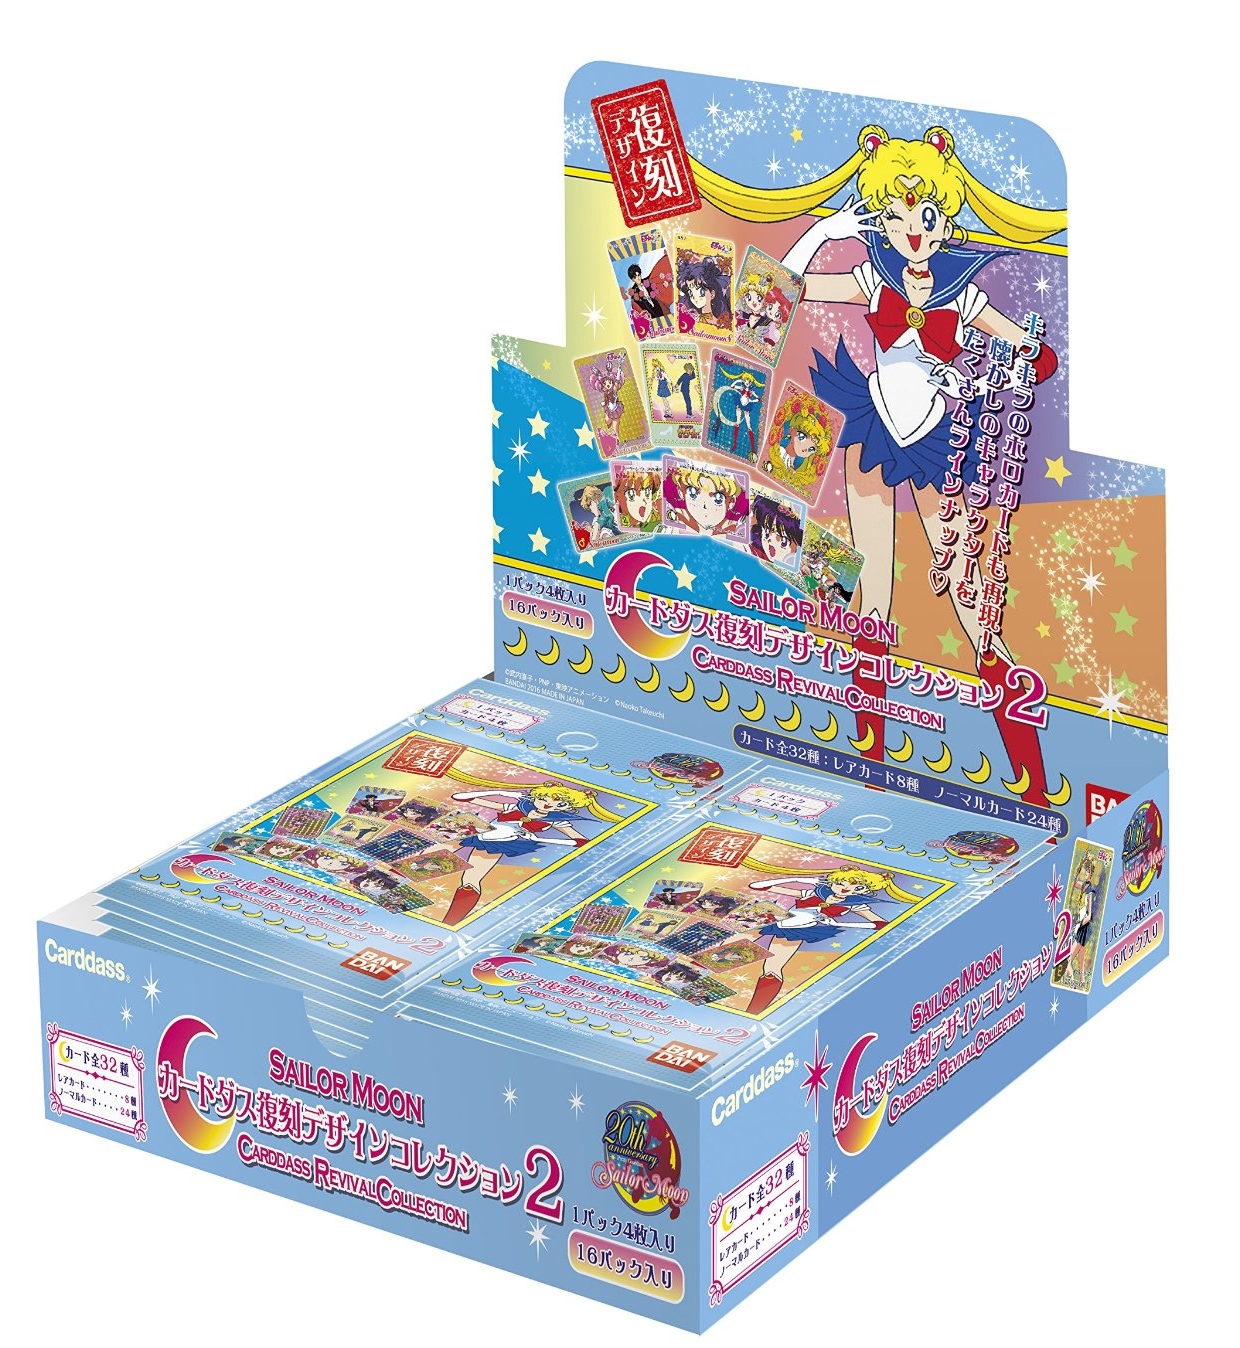 Sailor Moon 20th Anniversary trading cards carddass rivival collection 2 Bandai 